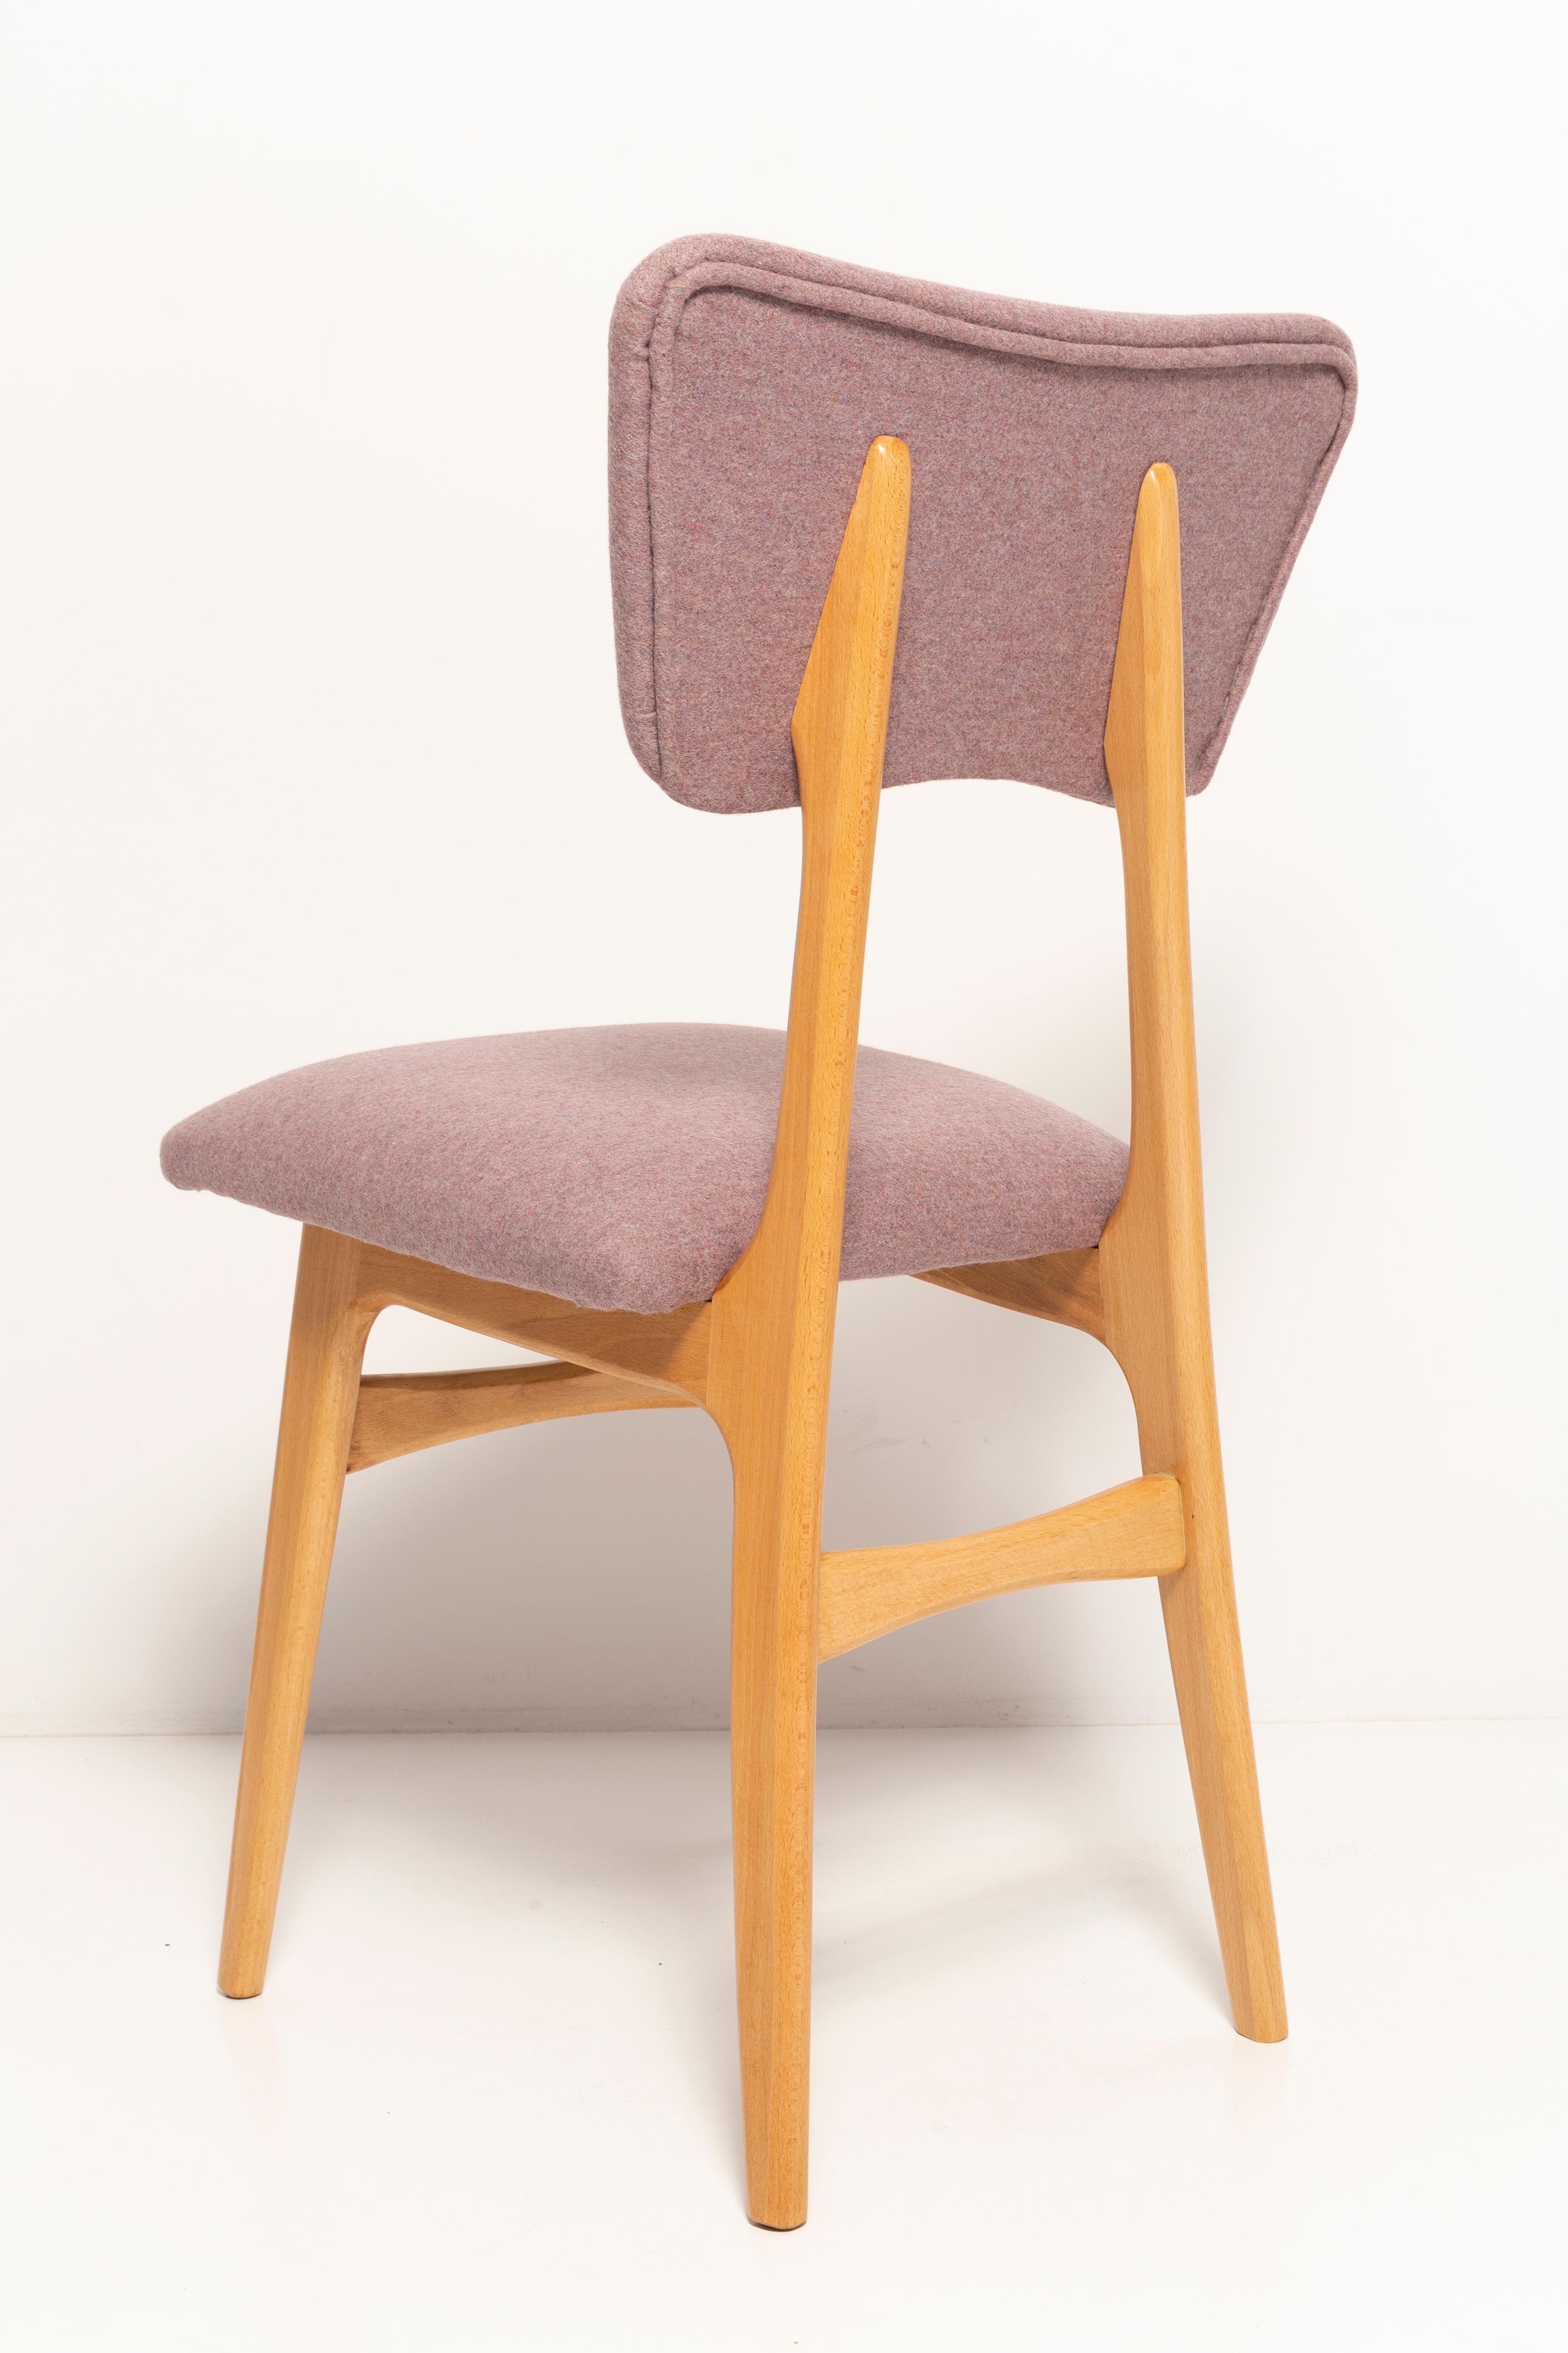 Five 20th Century Butterfly Dining Chairs, Pink Wool, Light Wood, Europe, 1960s For Sale 2